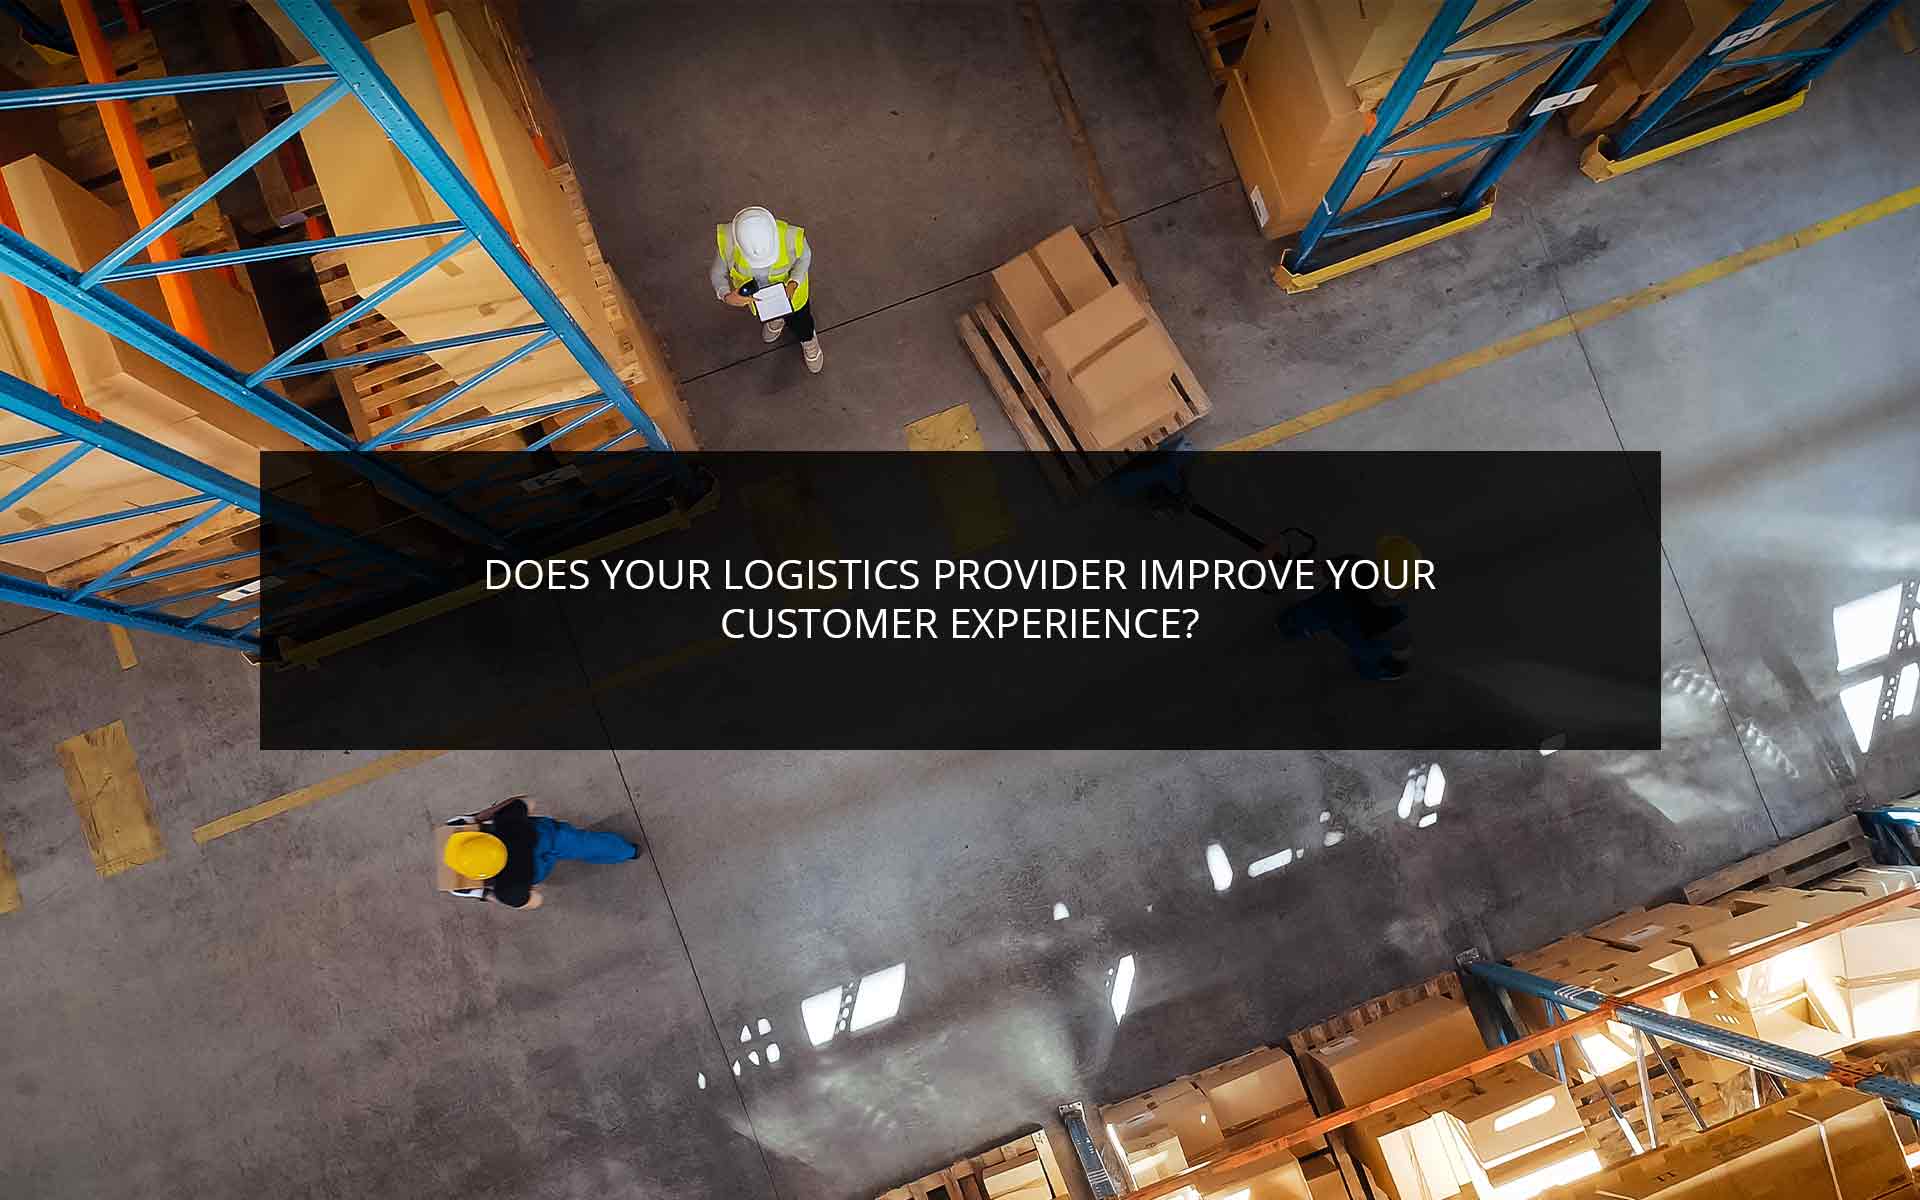 Does Your Logistics Provider Improve Your Customer Experience? | Phoenix 3PL